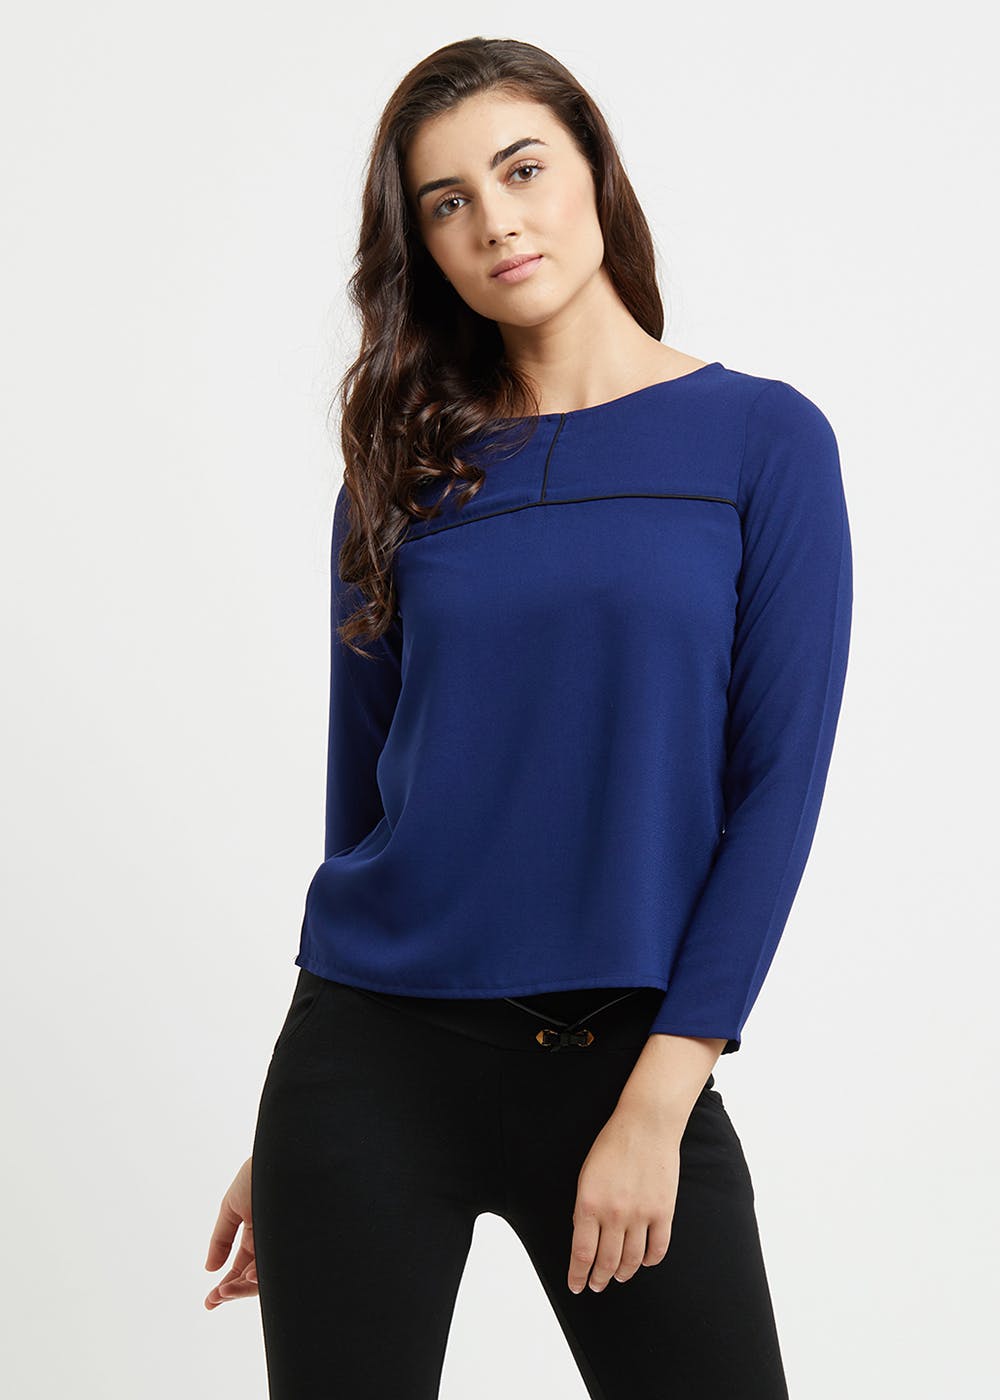 Get Contrast Piping Detail Navy Top at ₹ 540 | LBB Shop